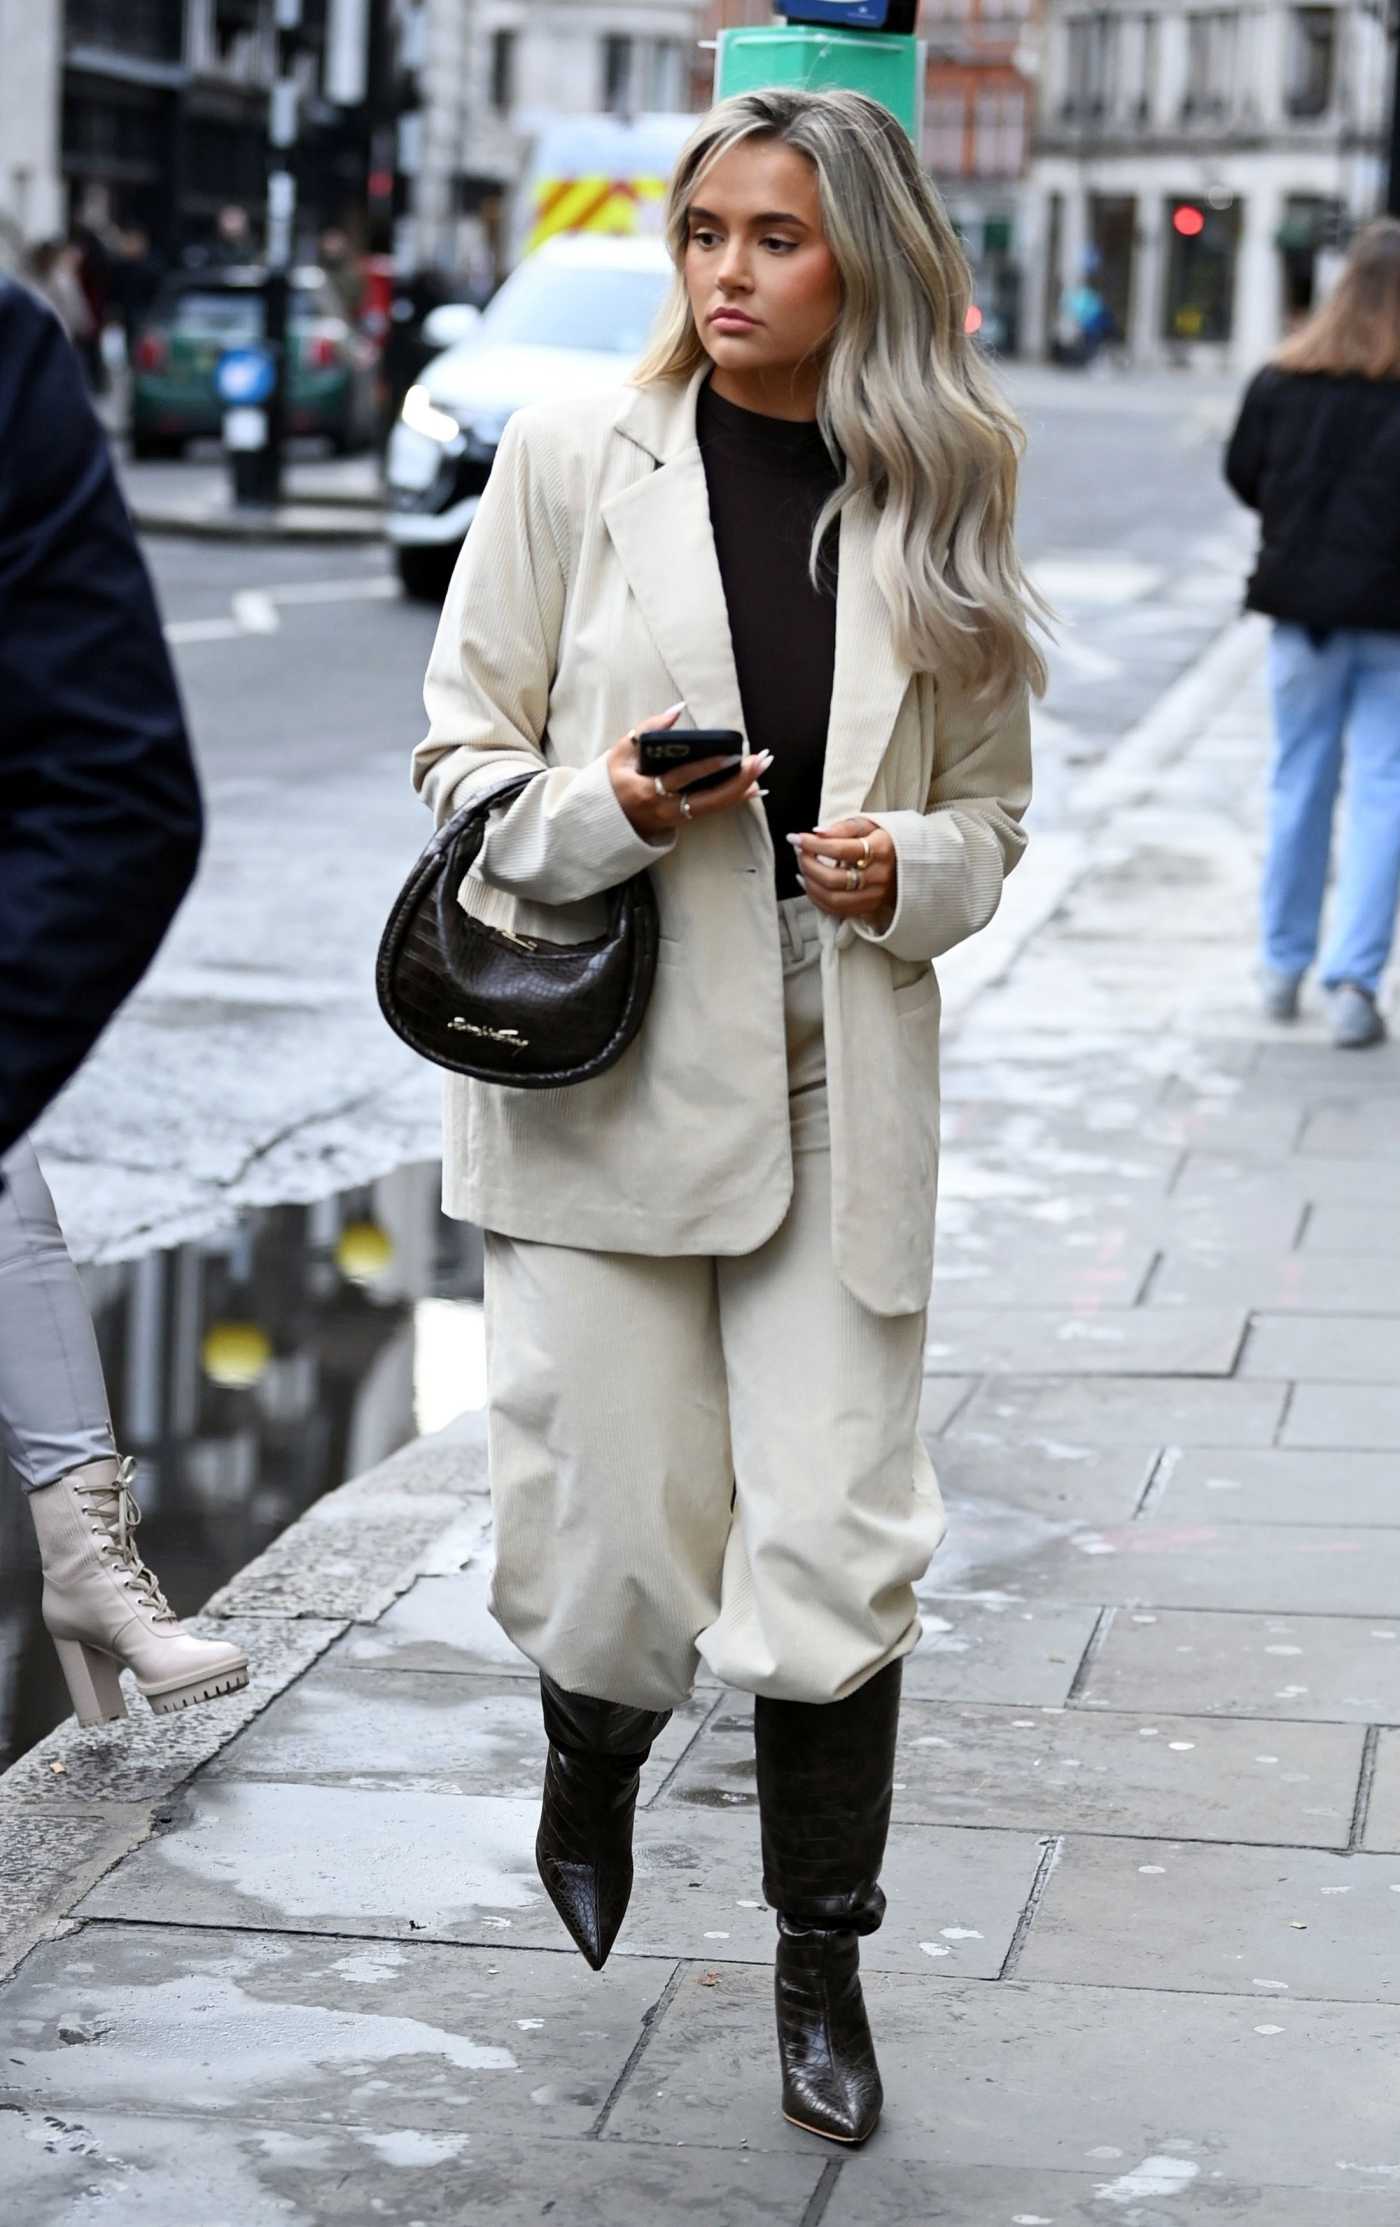 Molly-Mae Hague in a Beige Pantsuit Was Seen Out in London 02/14/2022